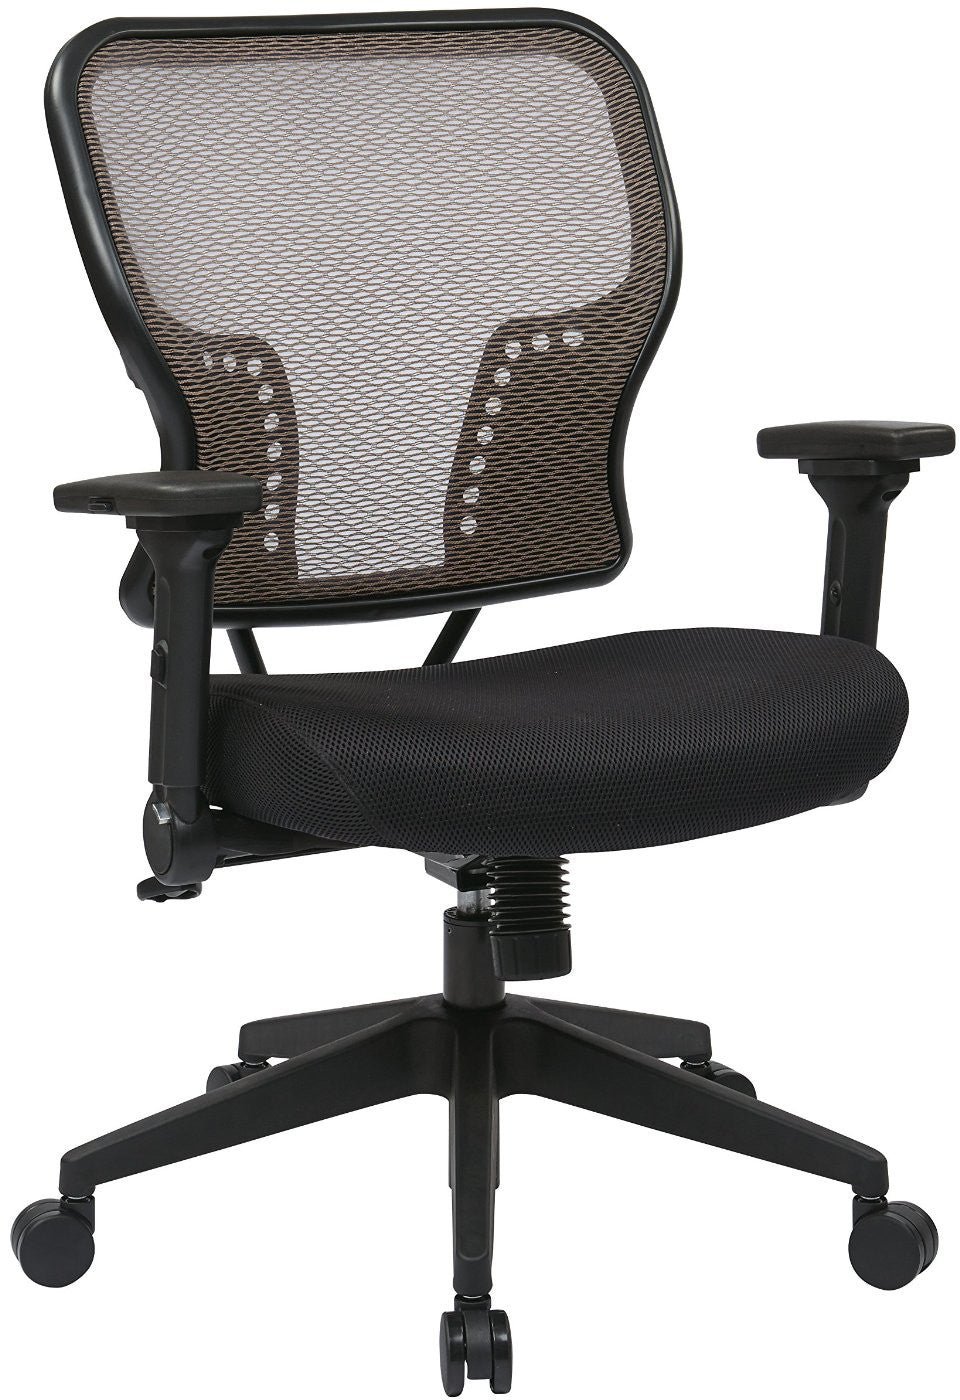 Space Seating 213-38n1f3 Latte Air Grid¨ Back And Padded Mesh Seat Chair With 2-to-1 Synchro Tilt Control